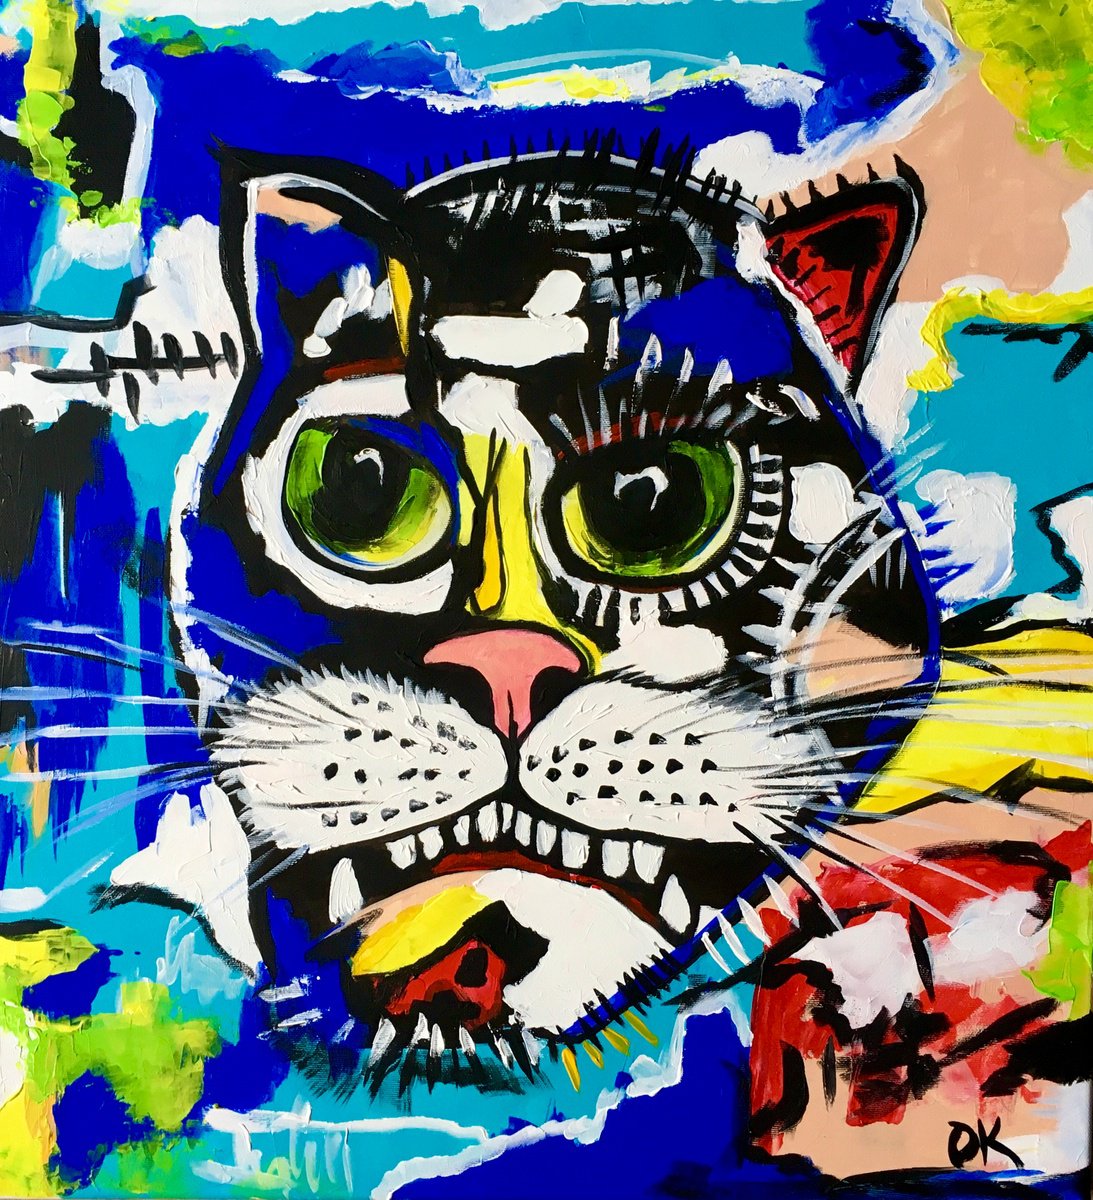 UNTITLED cat #3 version of famous painting by Jean-Michel Basquiat. by Olga Koval